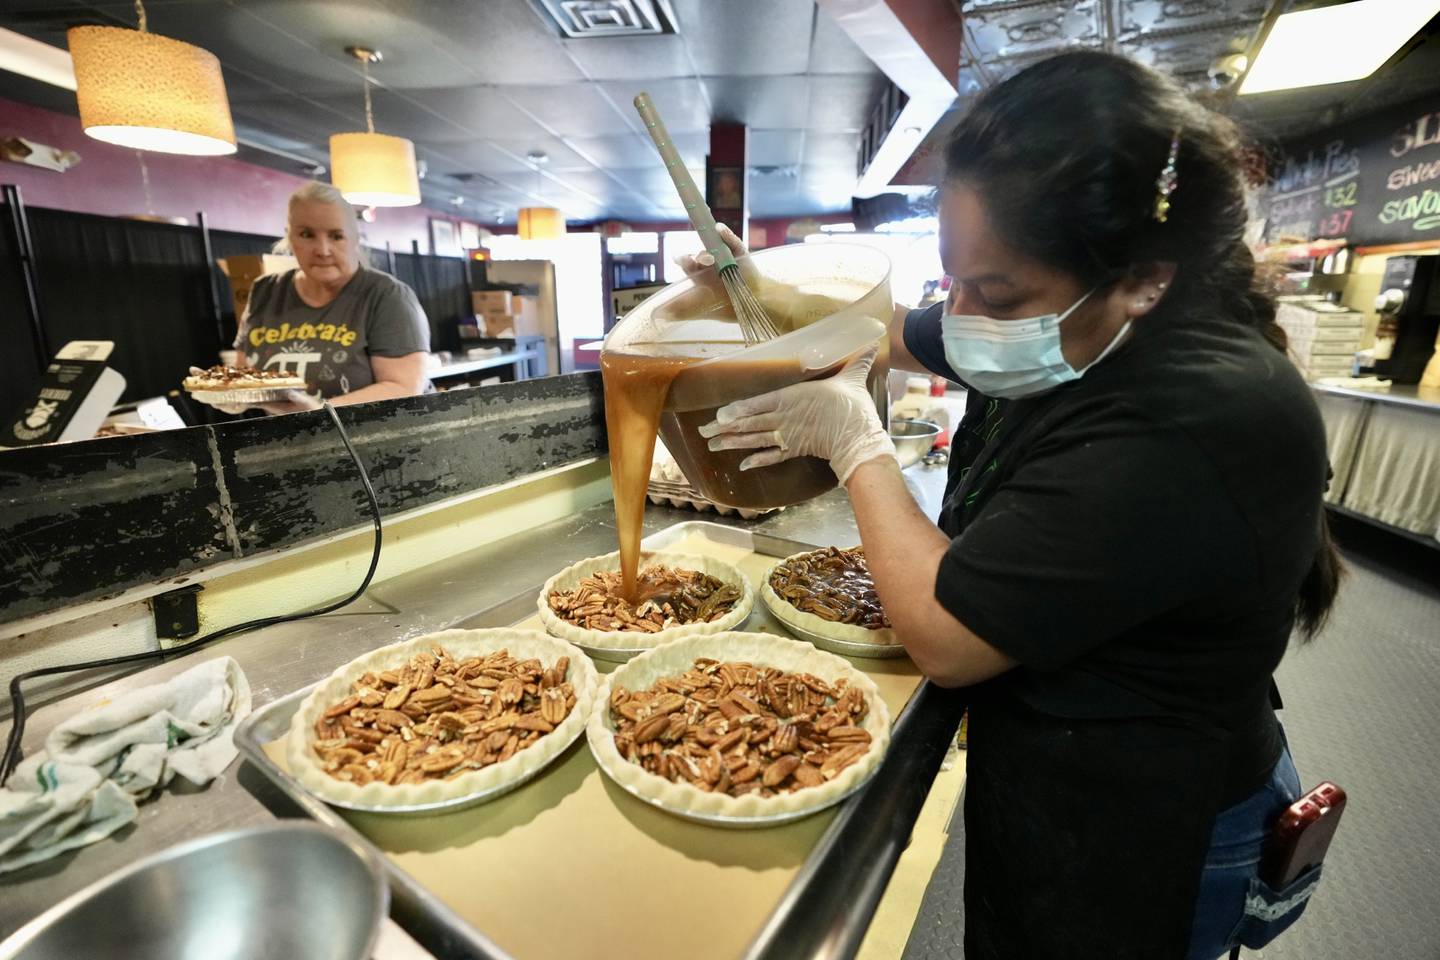 Alejandra Lopez makes pie at Dangerously Delicious on Pi Day on March 14, 2023. (Kaitlin Newman / The Baltimore Banner)